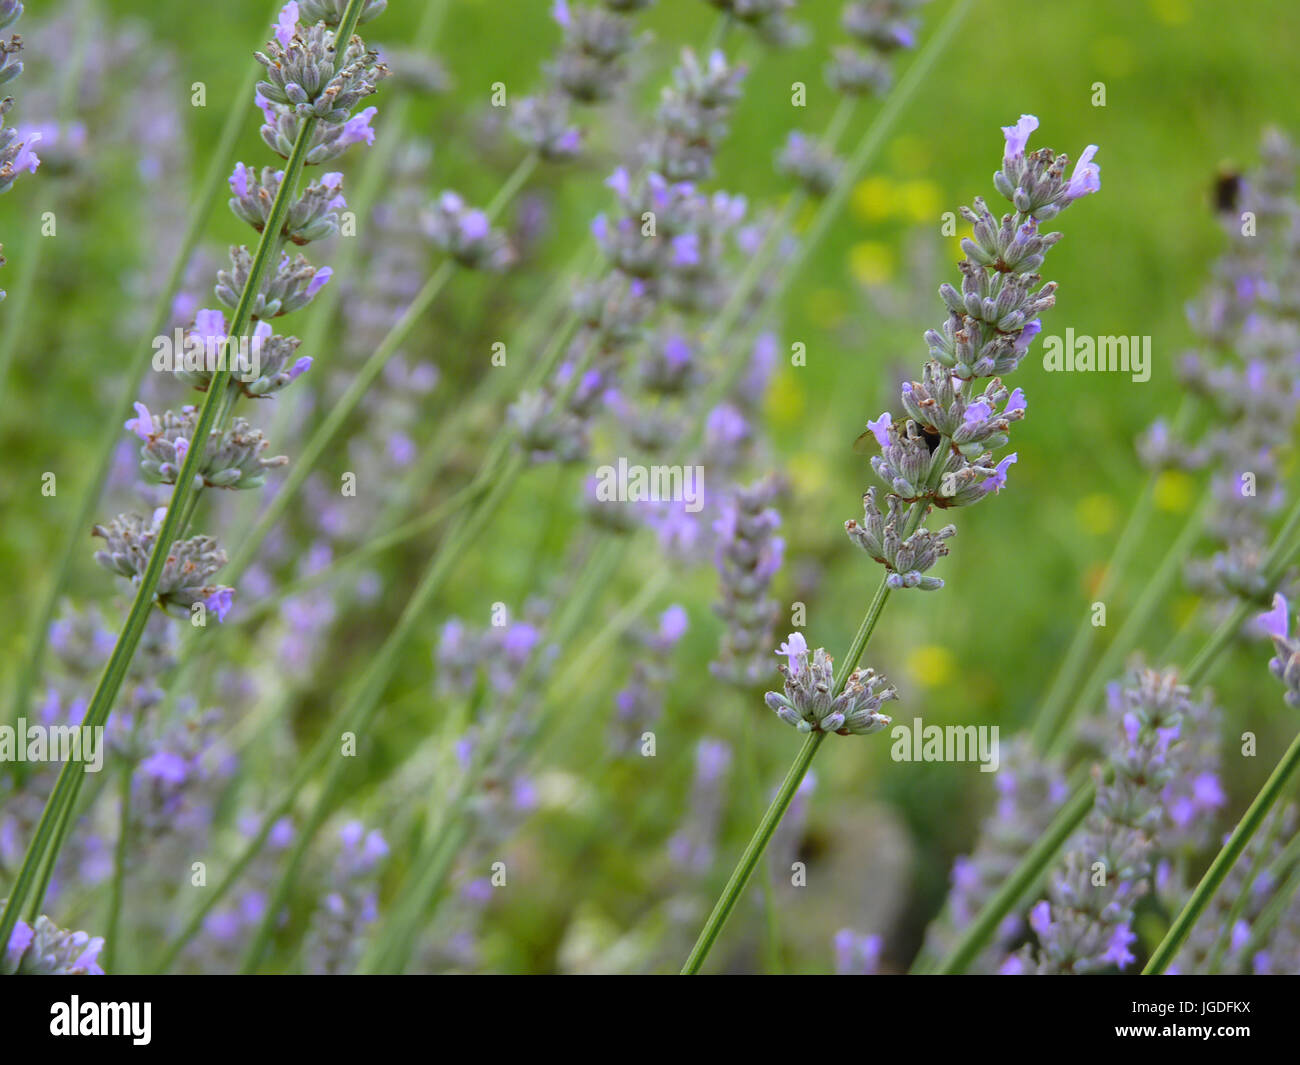 Purple lavender bed  in garden or park with flying bumblebee in background Stock Photo